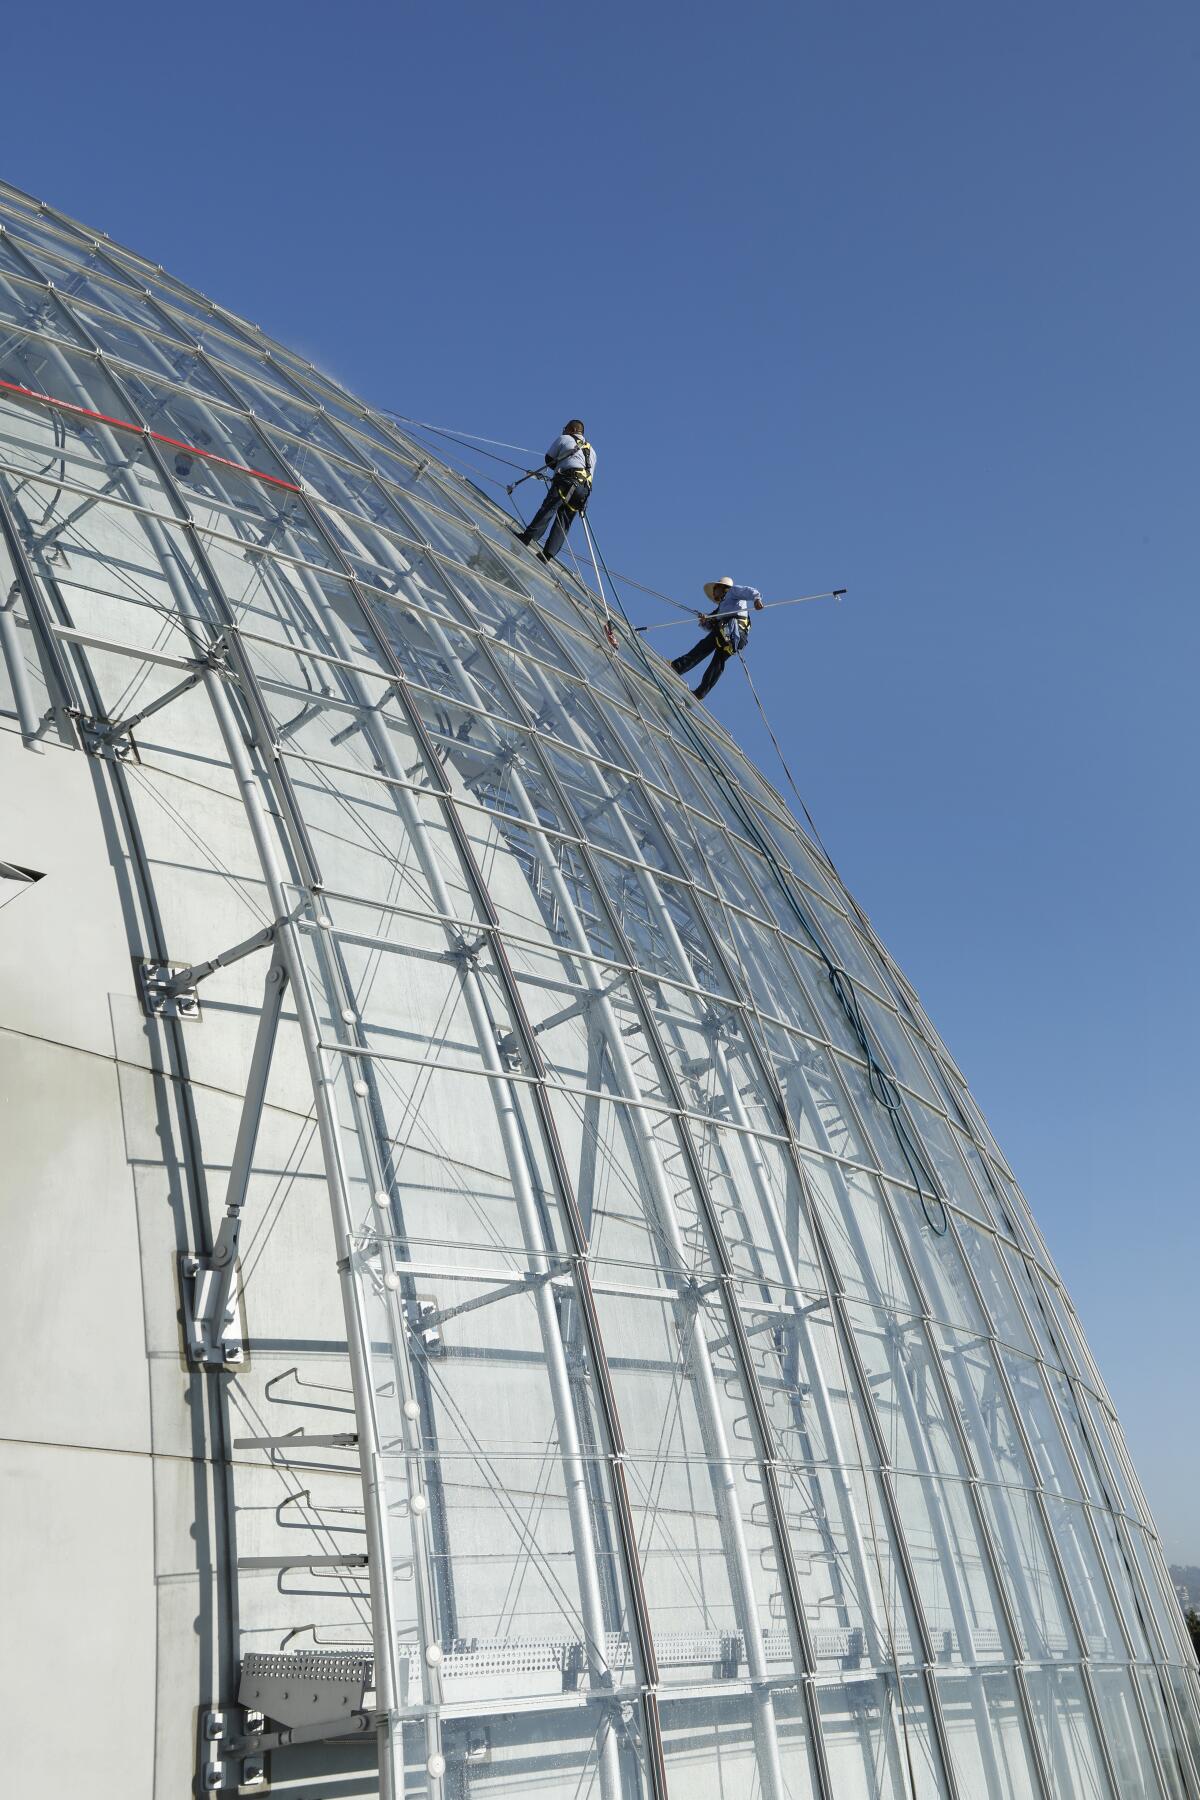 Window washers Mario Guzman, left, and Jesus Garcia clean windows of the Academy Museum of Motion Pictures Aug. 27, 2021 